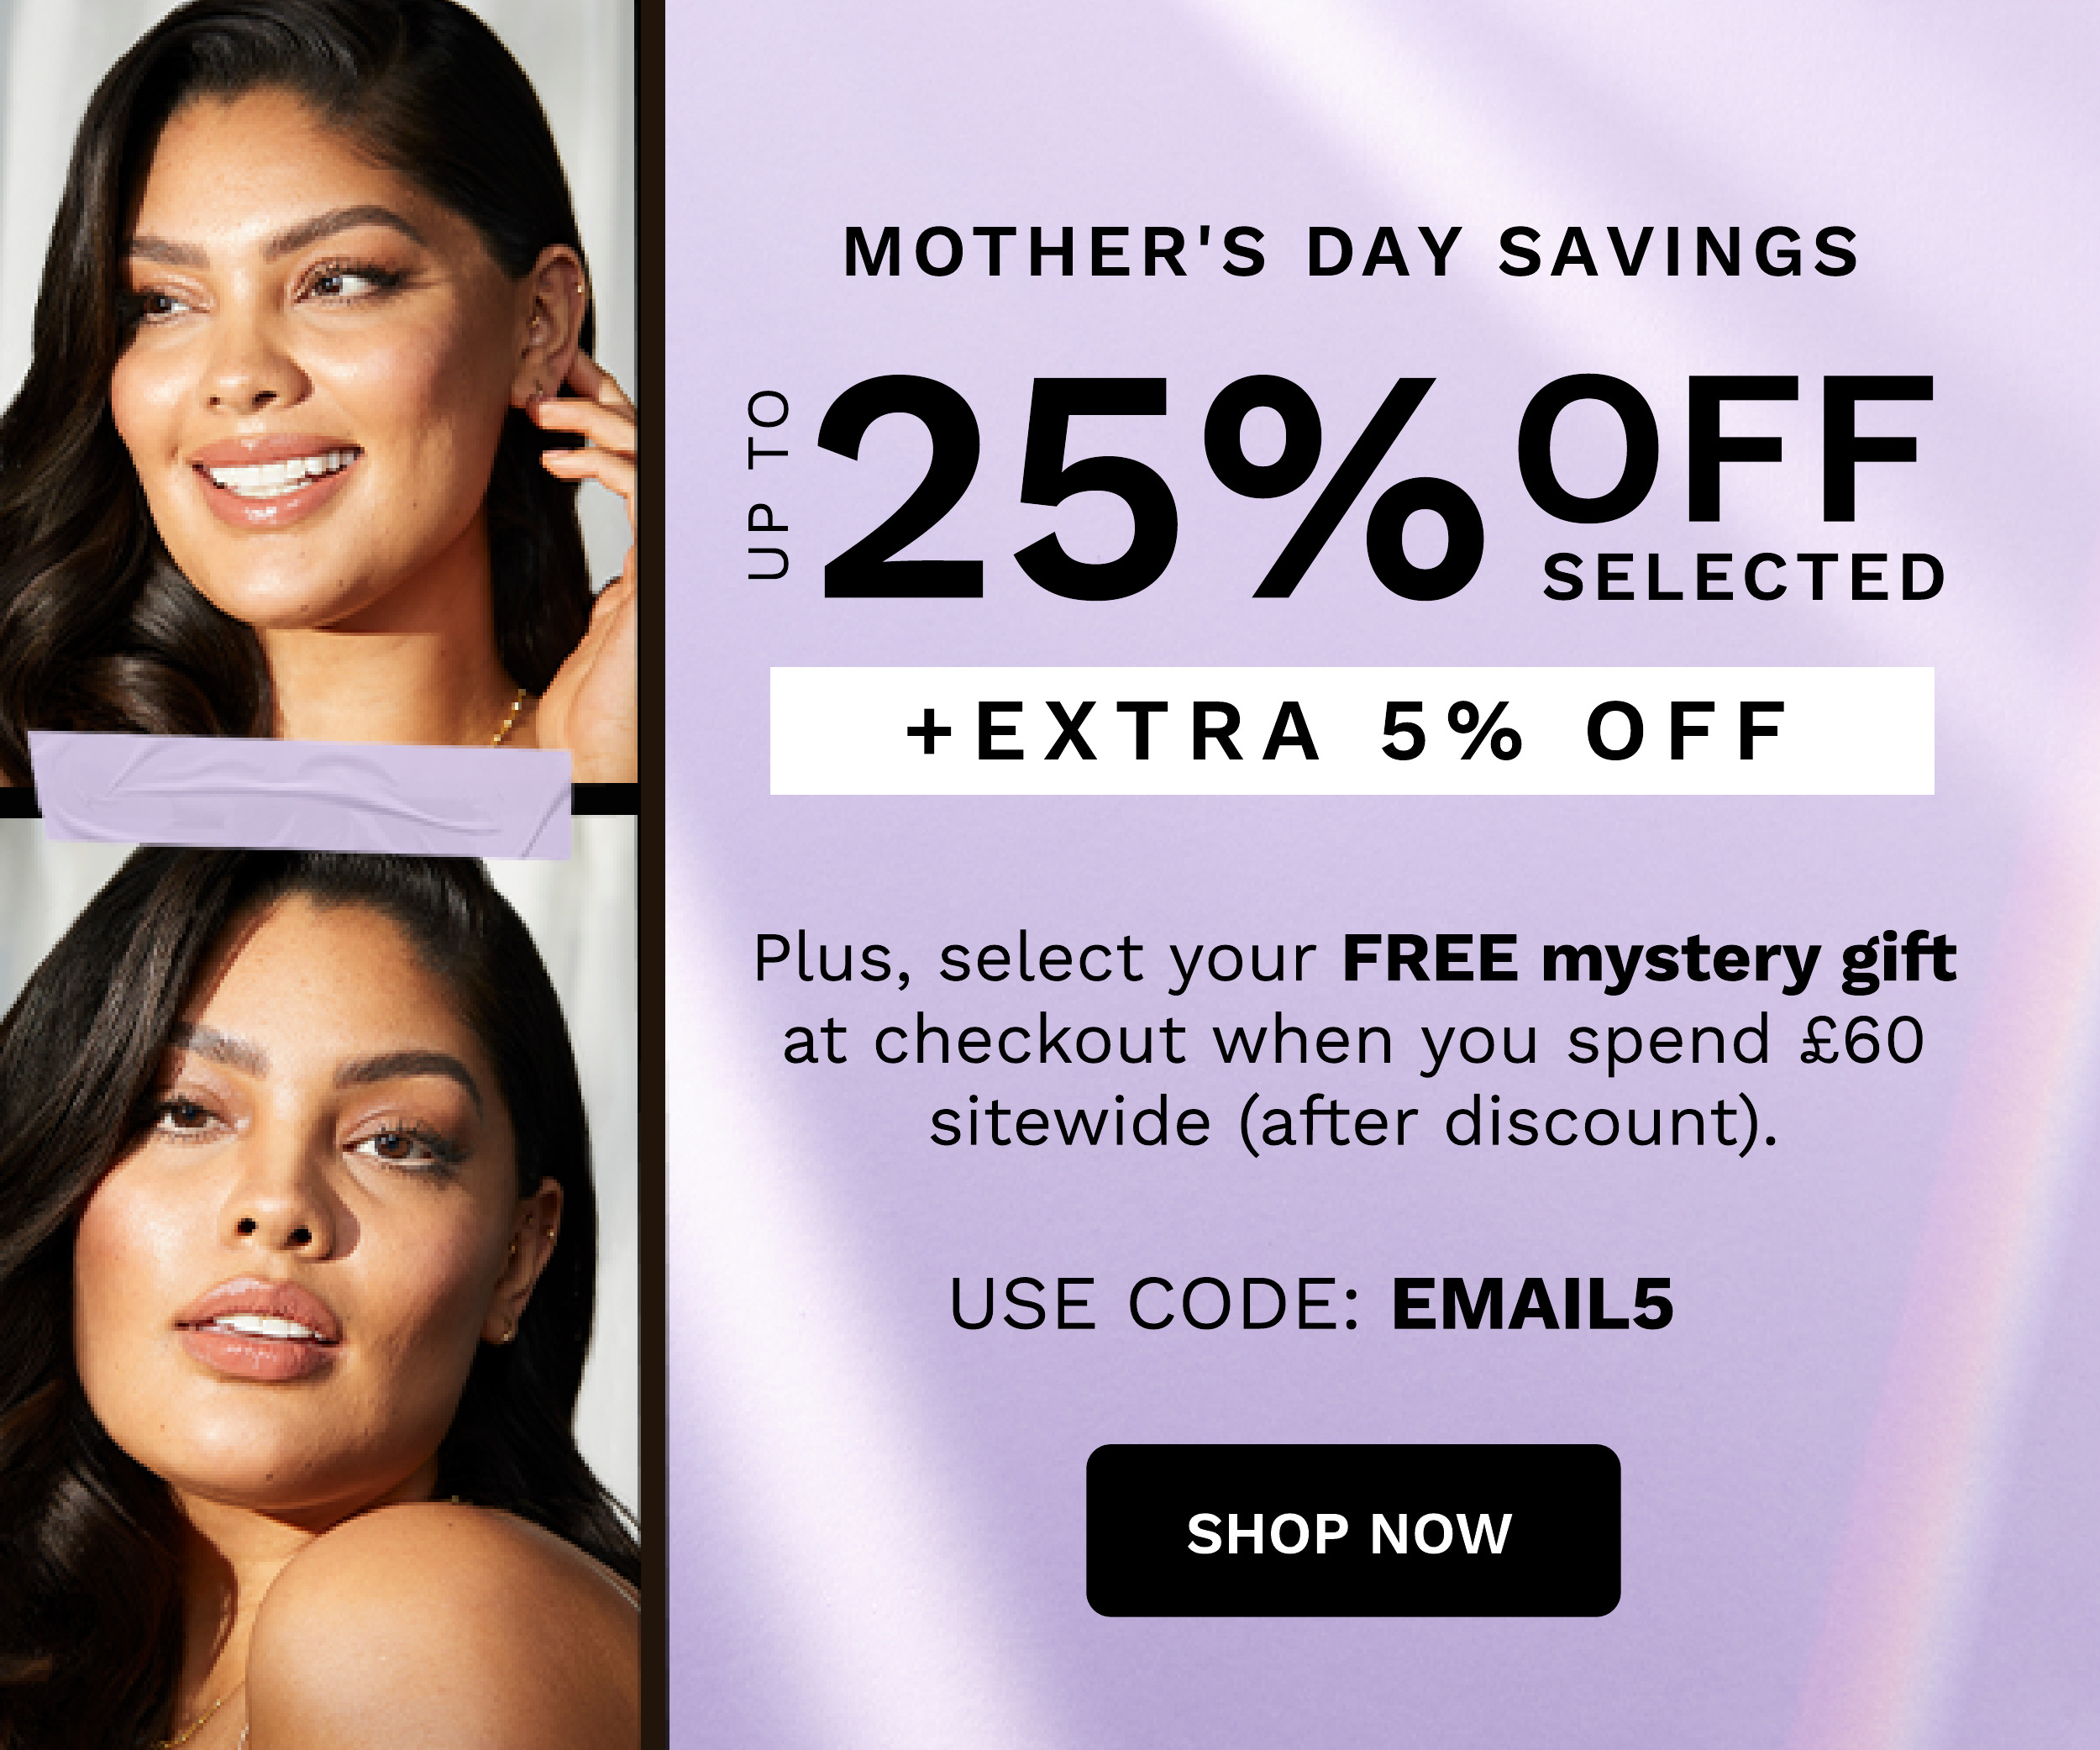  MOTHER'S DAY SAVINGS 2 5 % QLETED EXTRA 5% OFF UP TO Plus, select your FREE mystery gift at checkout when you spend 60 sitewide after discount. USE CODE: EMAILS SHOP NOW 